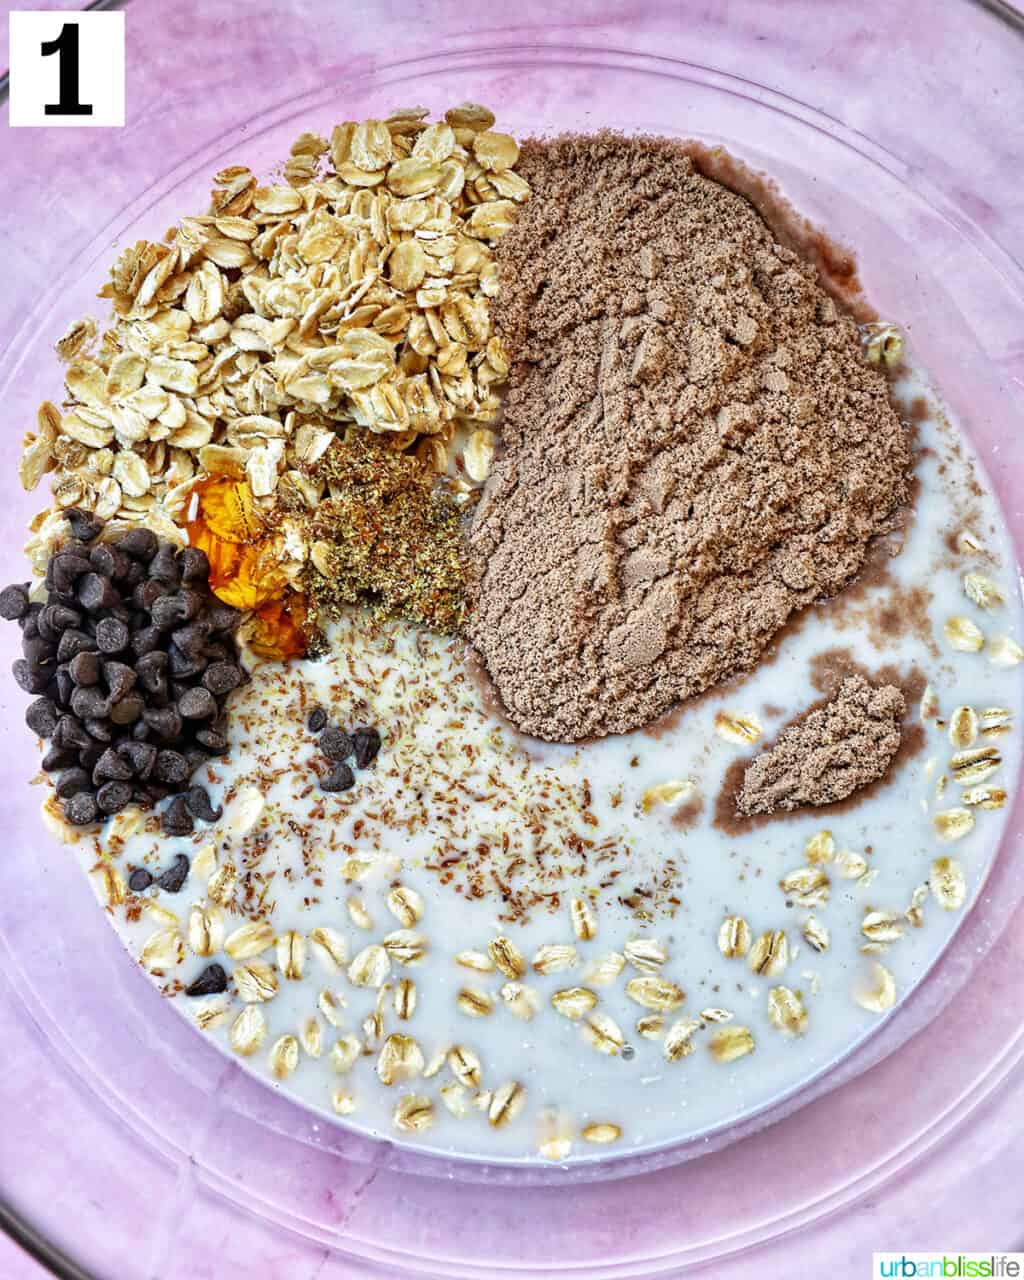 ingredients to make chocolate protein overnight oats in a large glass bowl.